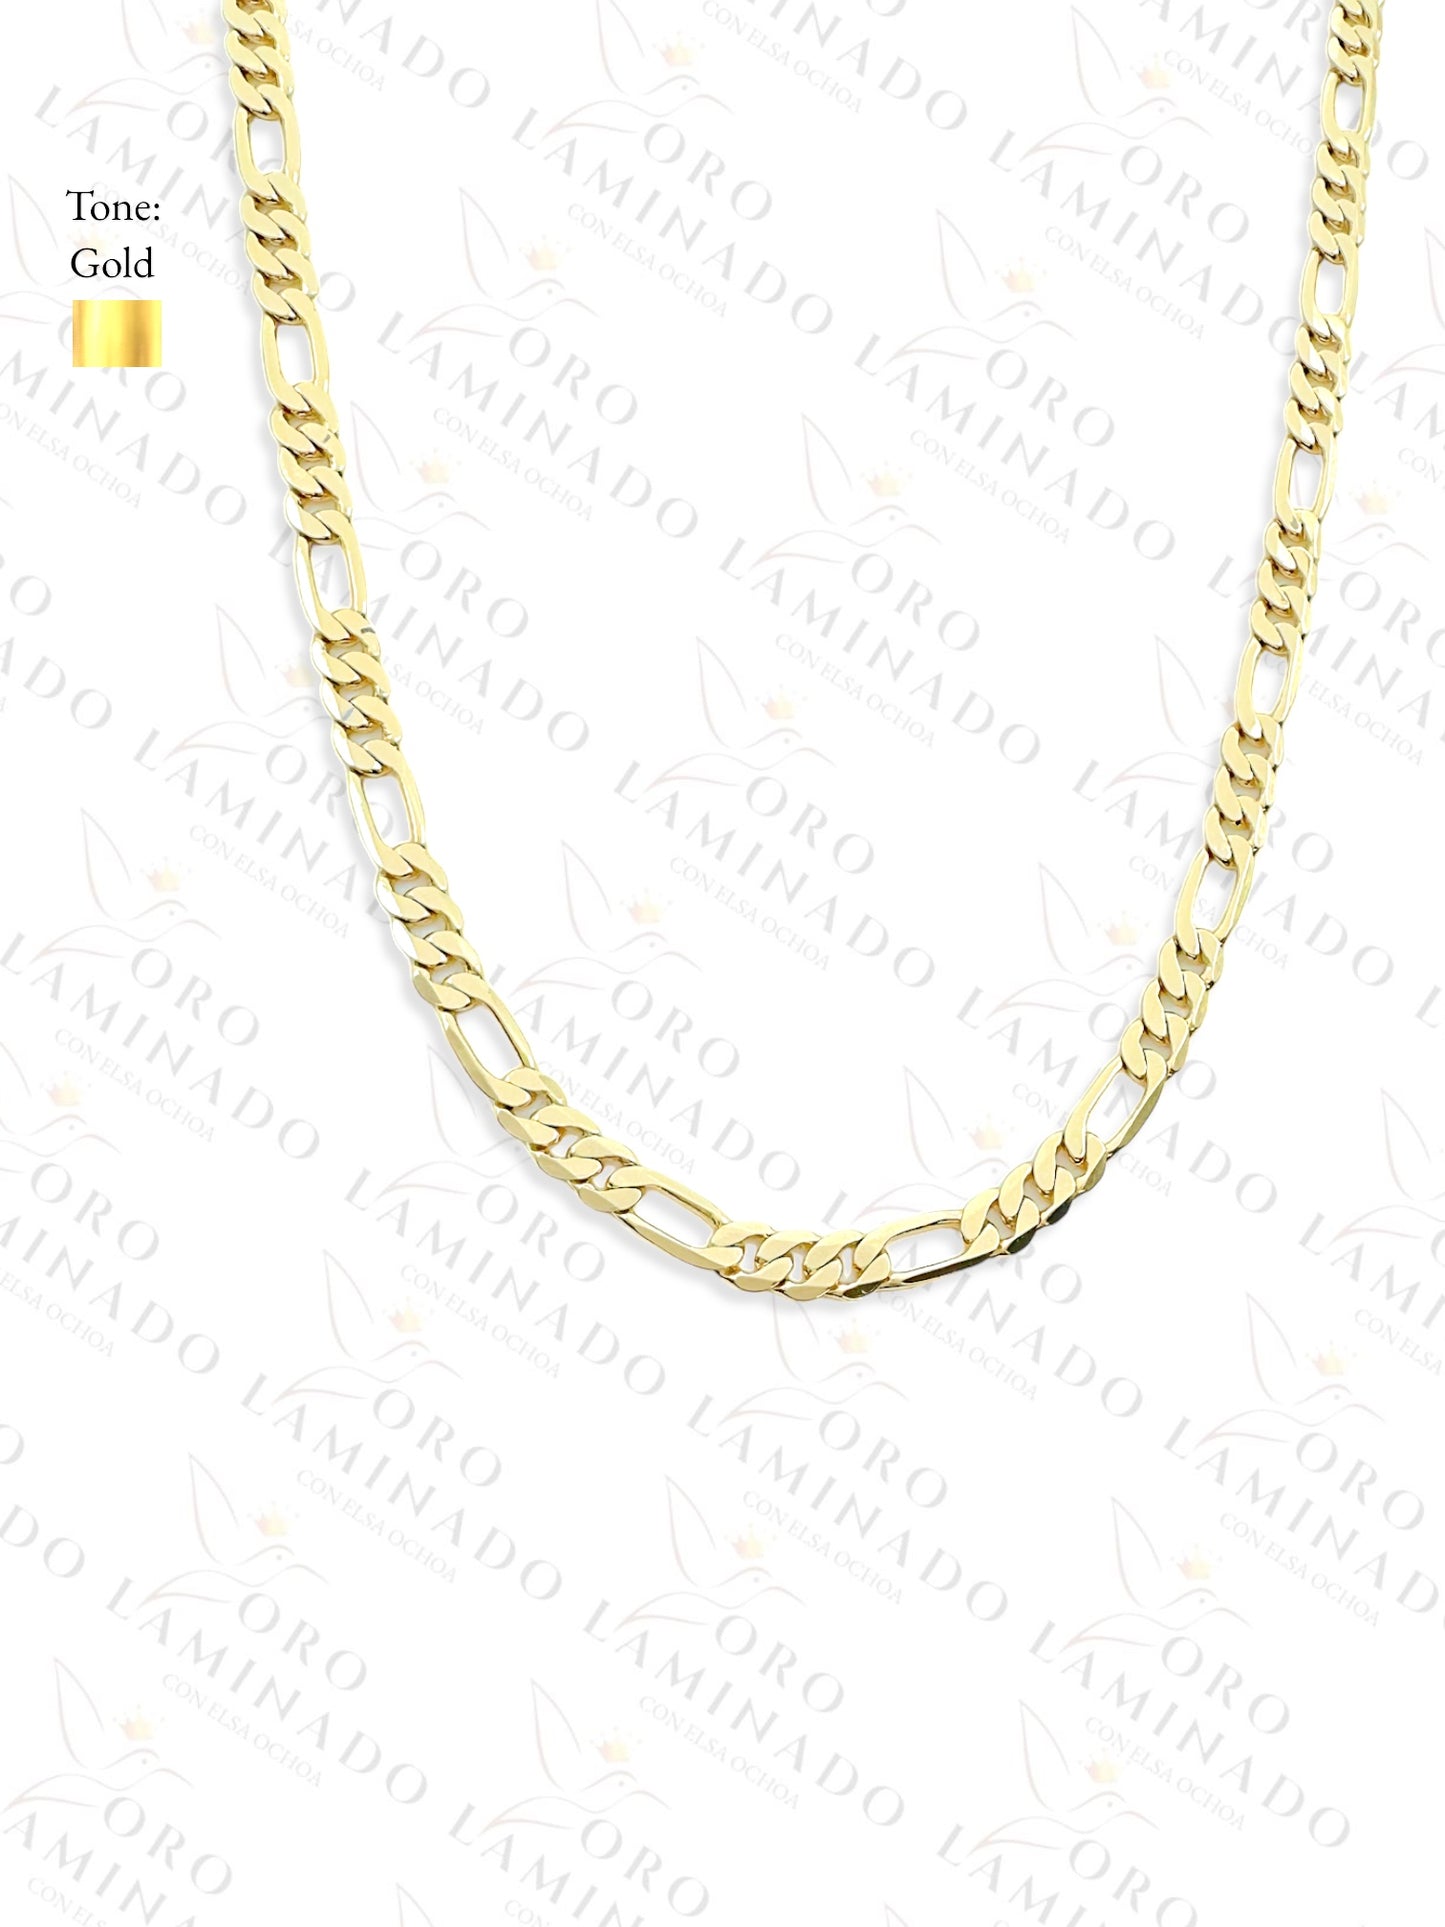 High Quality FIgaro Chains Pack of 6 Size 18" 4mm C296